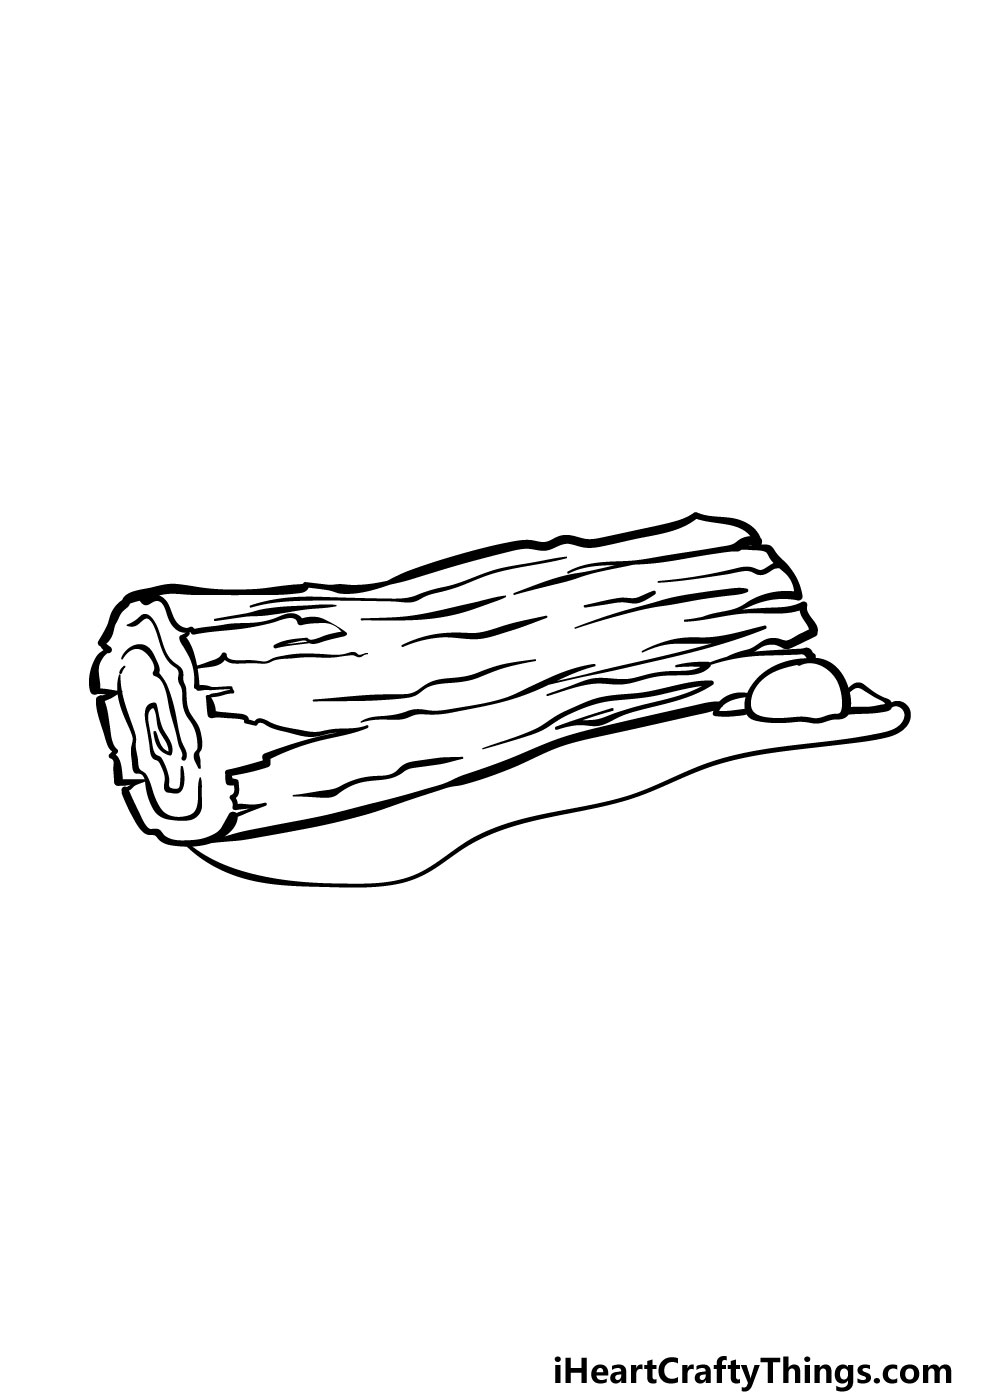 how to draw a log step 5